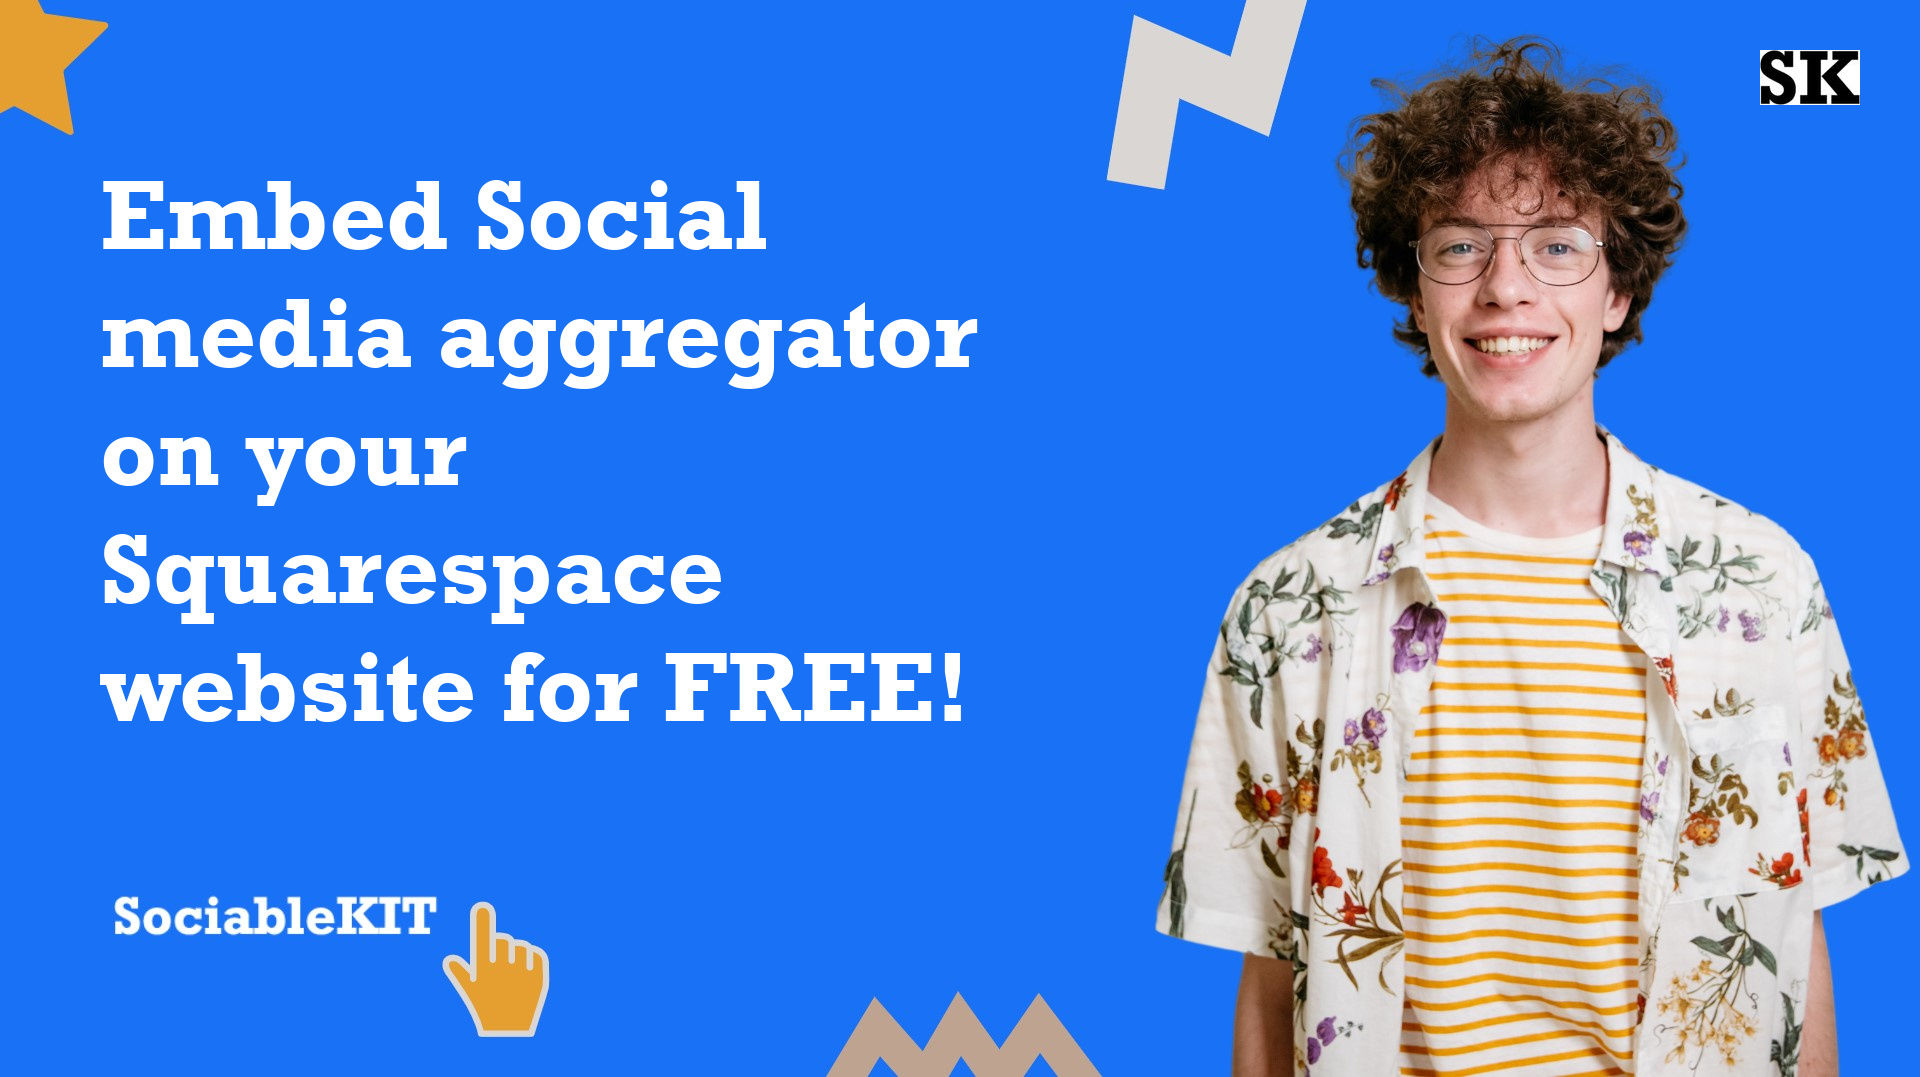 How to embed Social media aggregator on your Squarespace website for FREE?